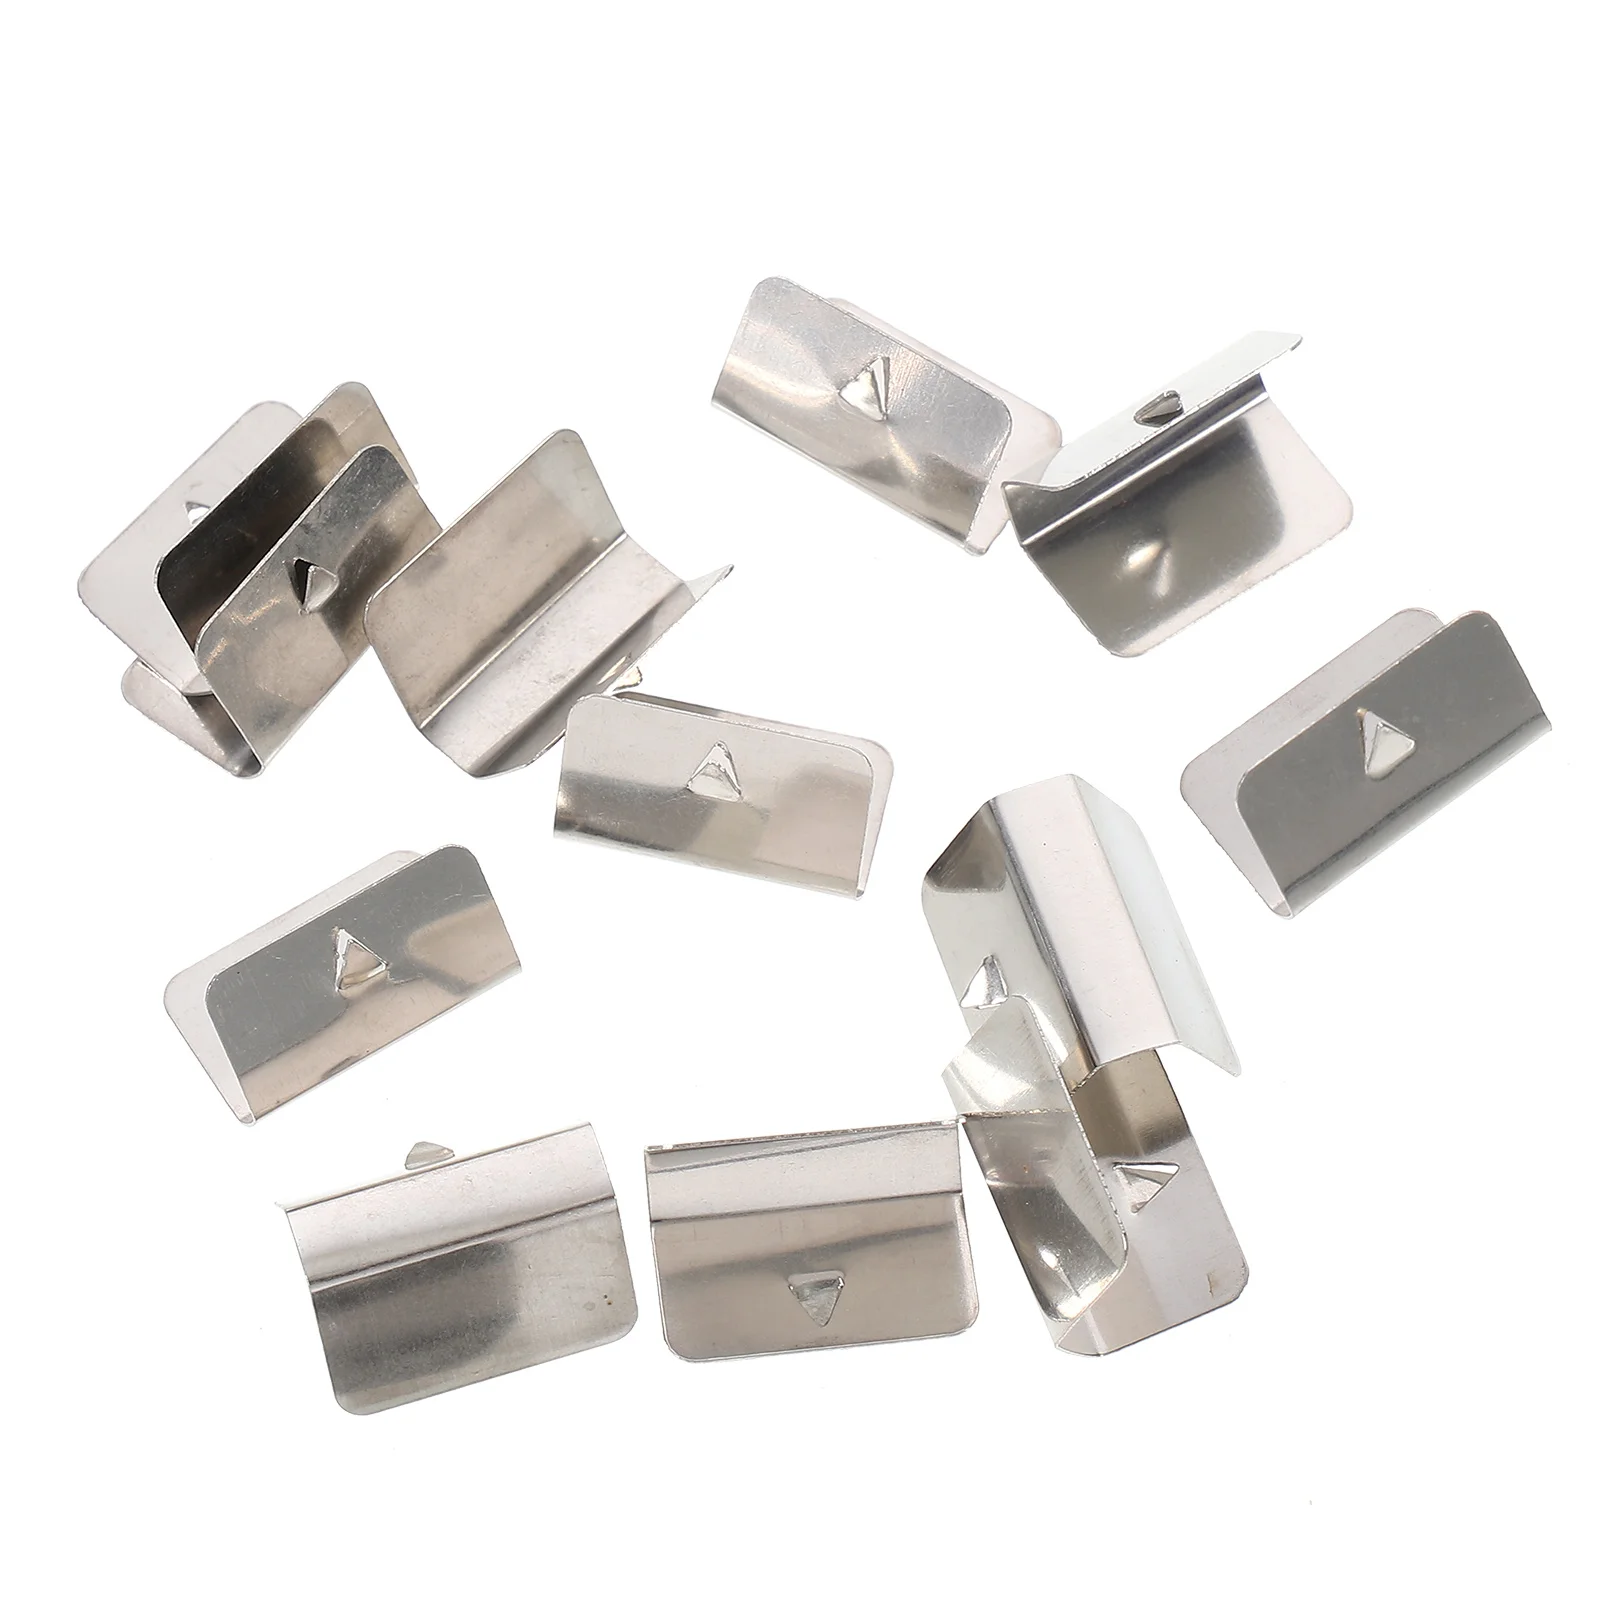 

12 Pcs Windshield Clip Deflector Channel Fitting Retaining Metal Rain Clips Stainless Fixing Steel